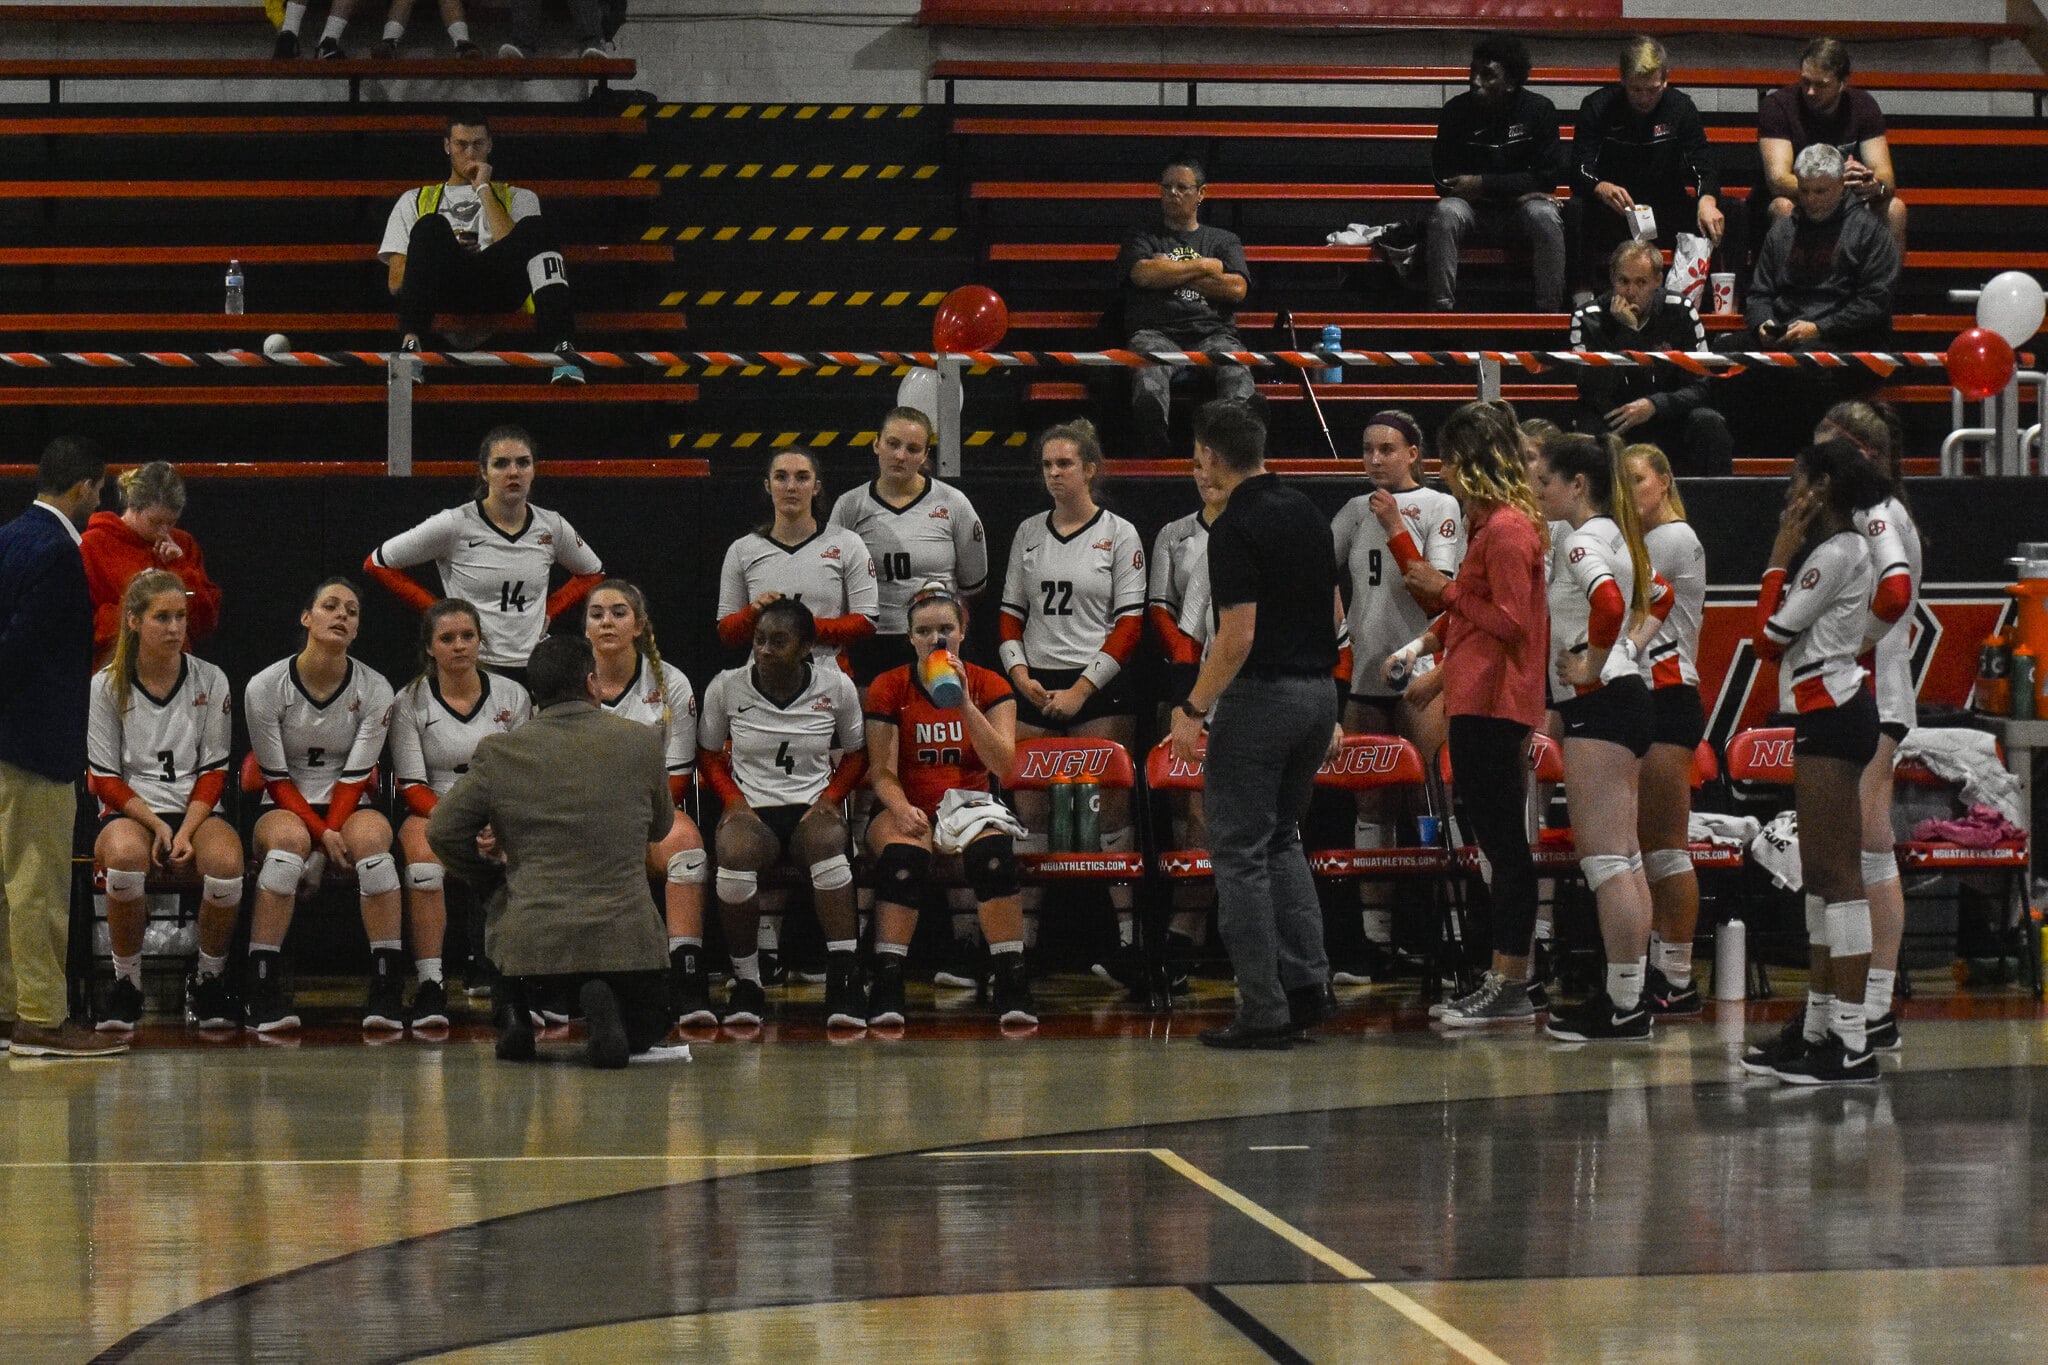 The coaches talk to the team during a time out.